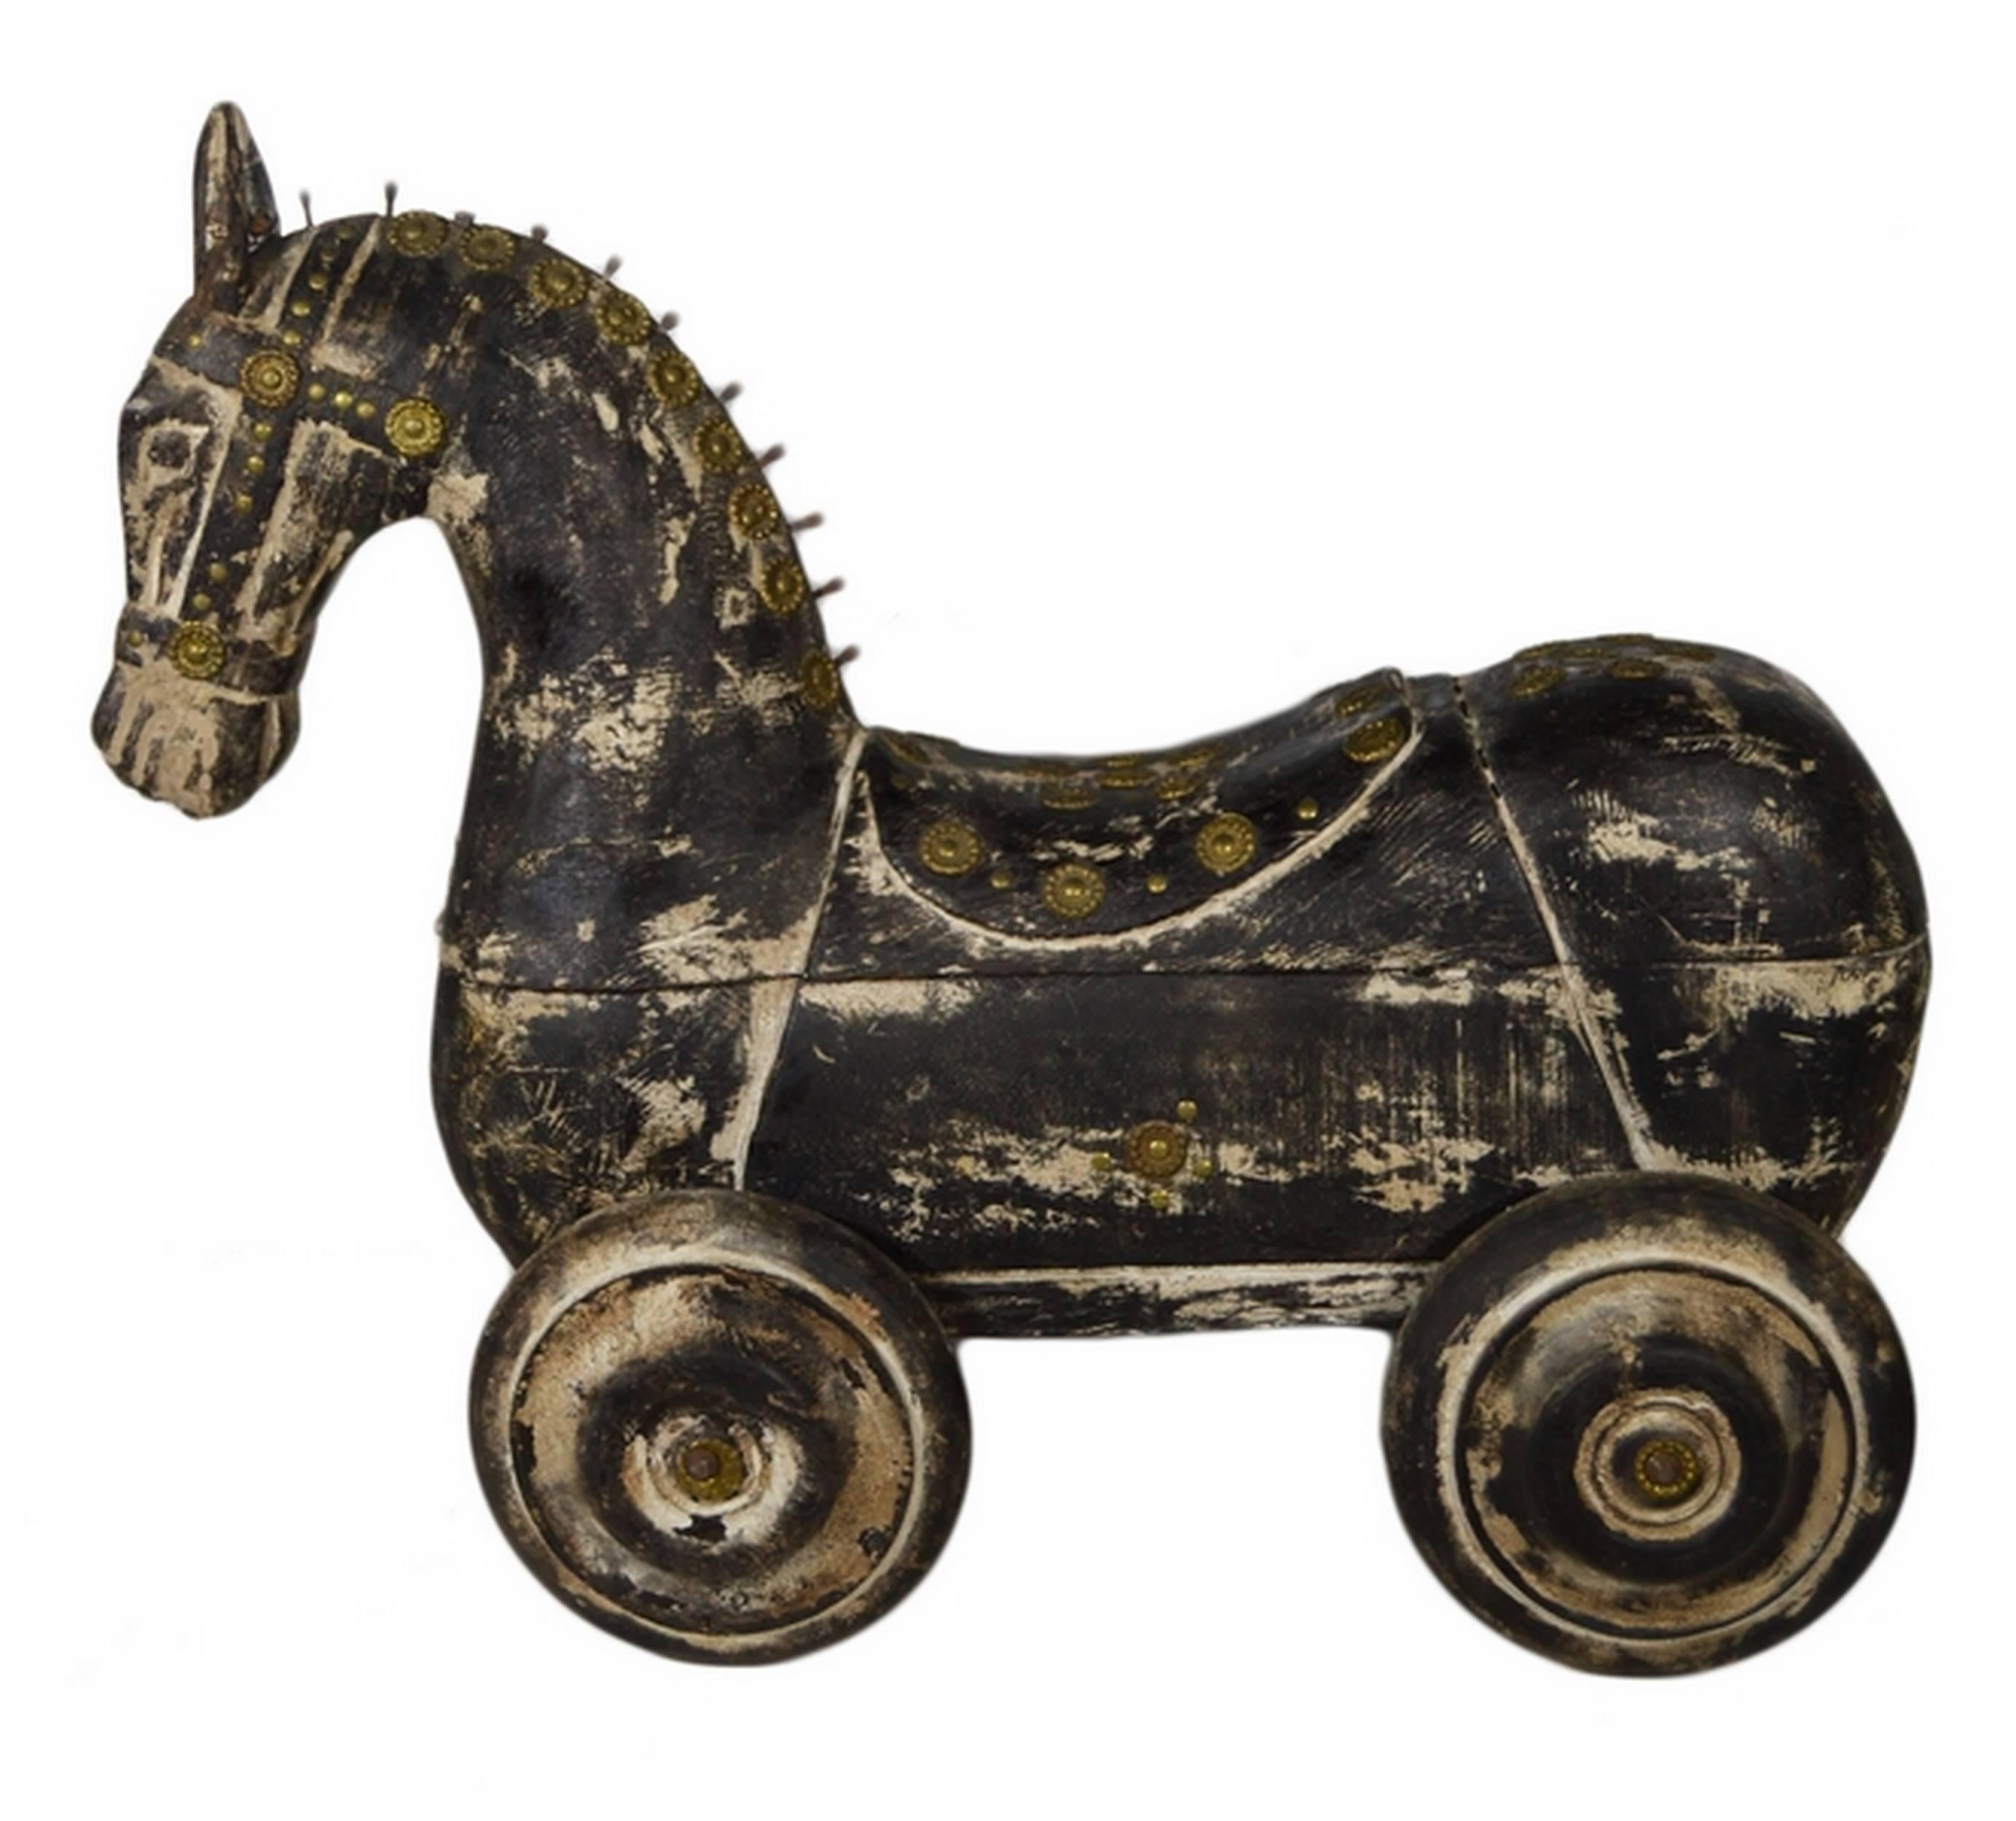 A hand carved wooden horse with wheels and iron features from 20th century India.  This horse showcases a stylized appearance with its unique mane and classic bridle with iron features.  Rather than legs this horse sits on four wheels, and the